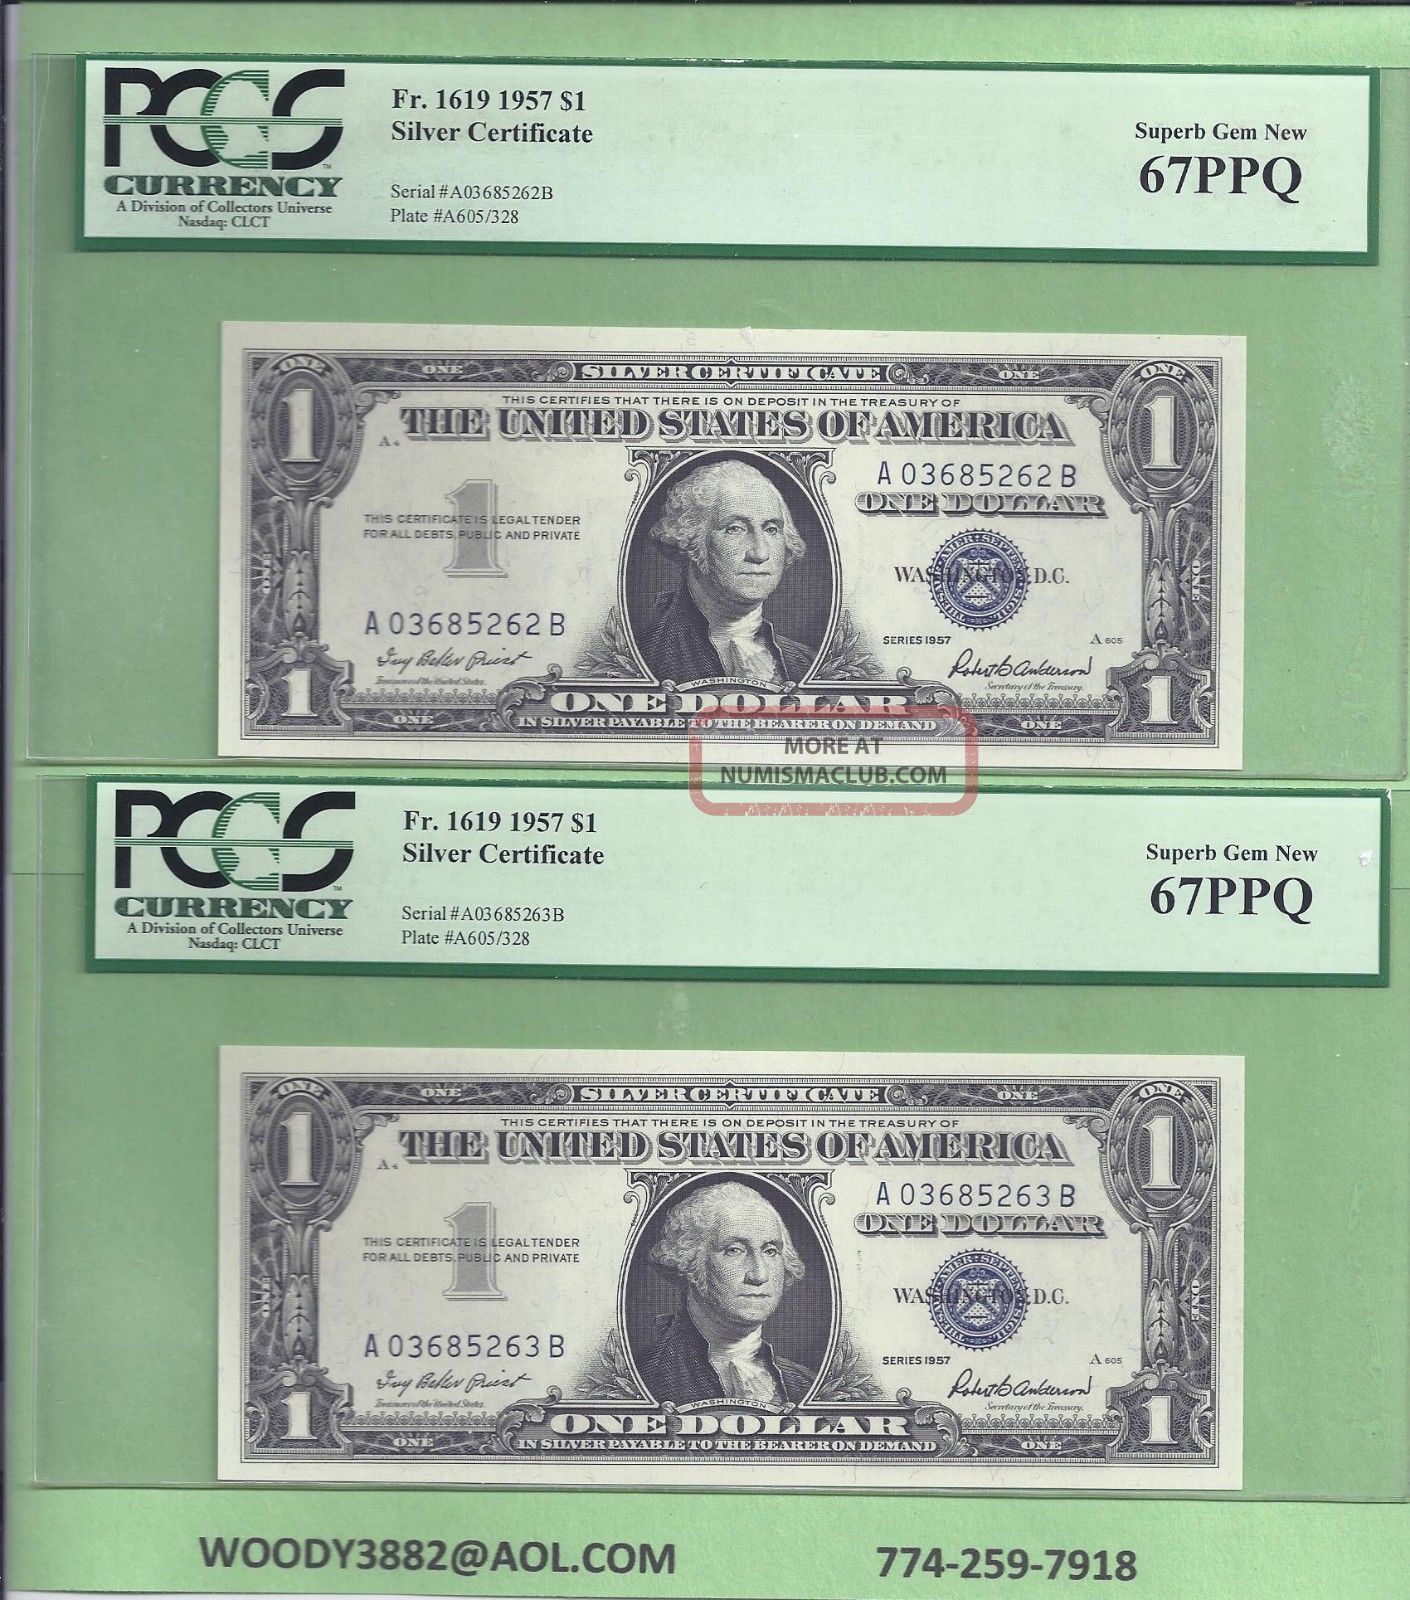 1957 Silver Certificate Fr - 1619 2 Consec Pcgs - Gem - 67 Ppq 5262 - 263 Small Size Notes photo